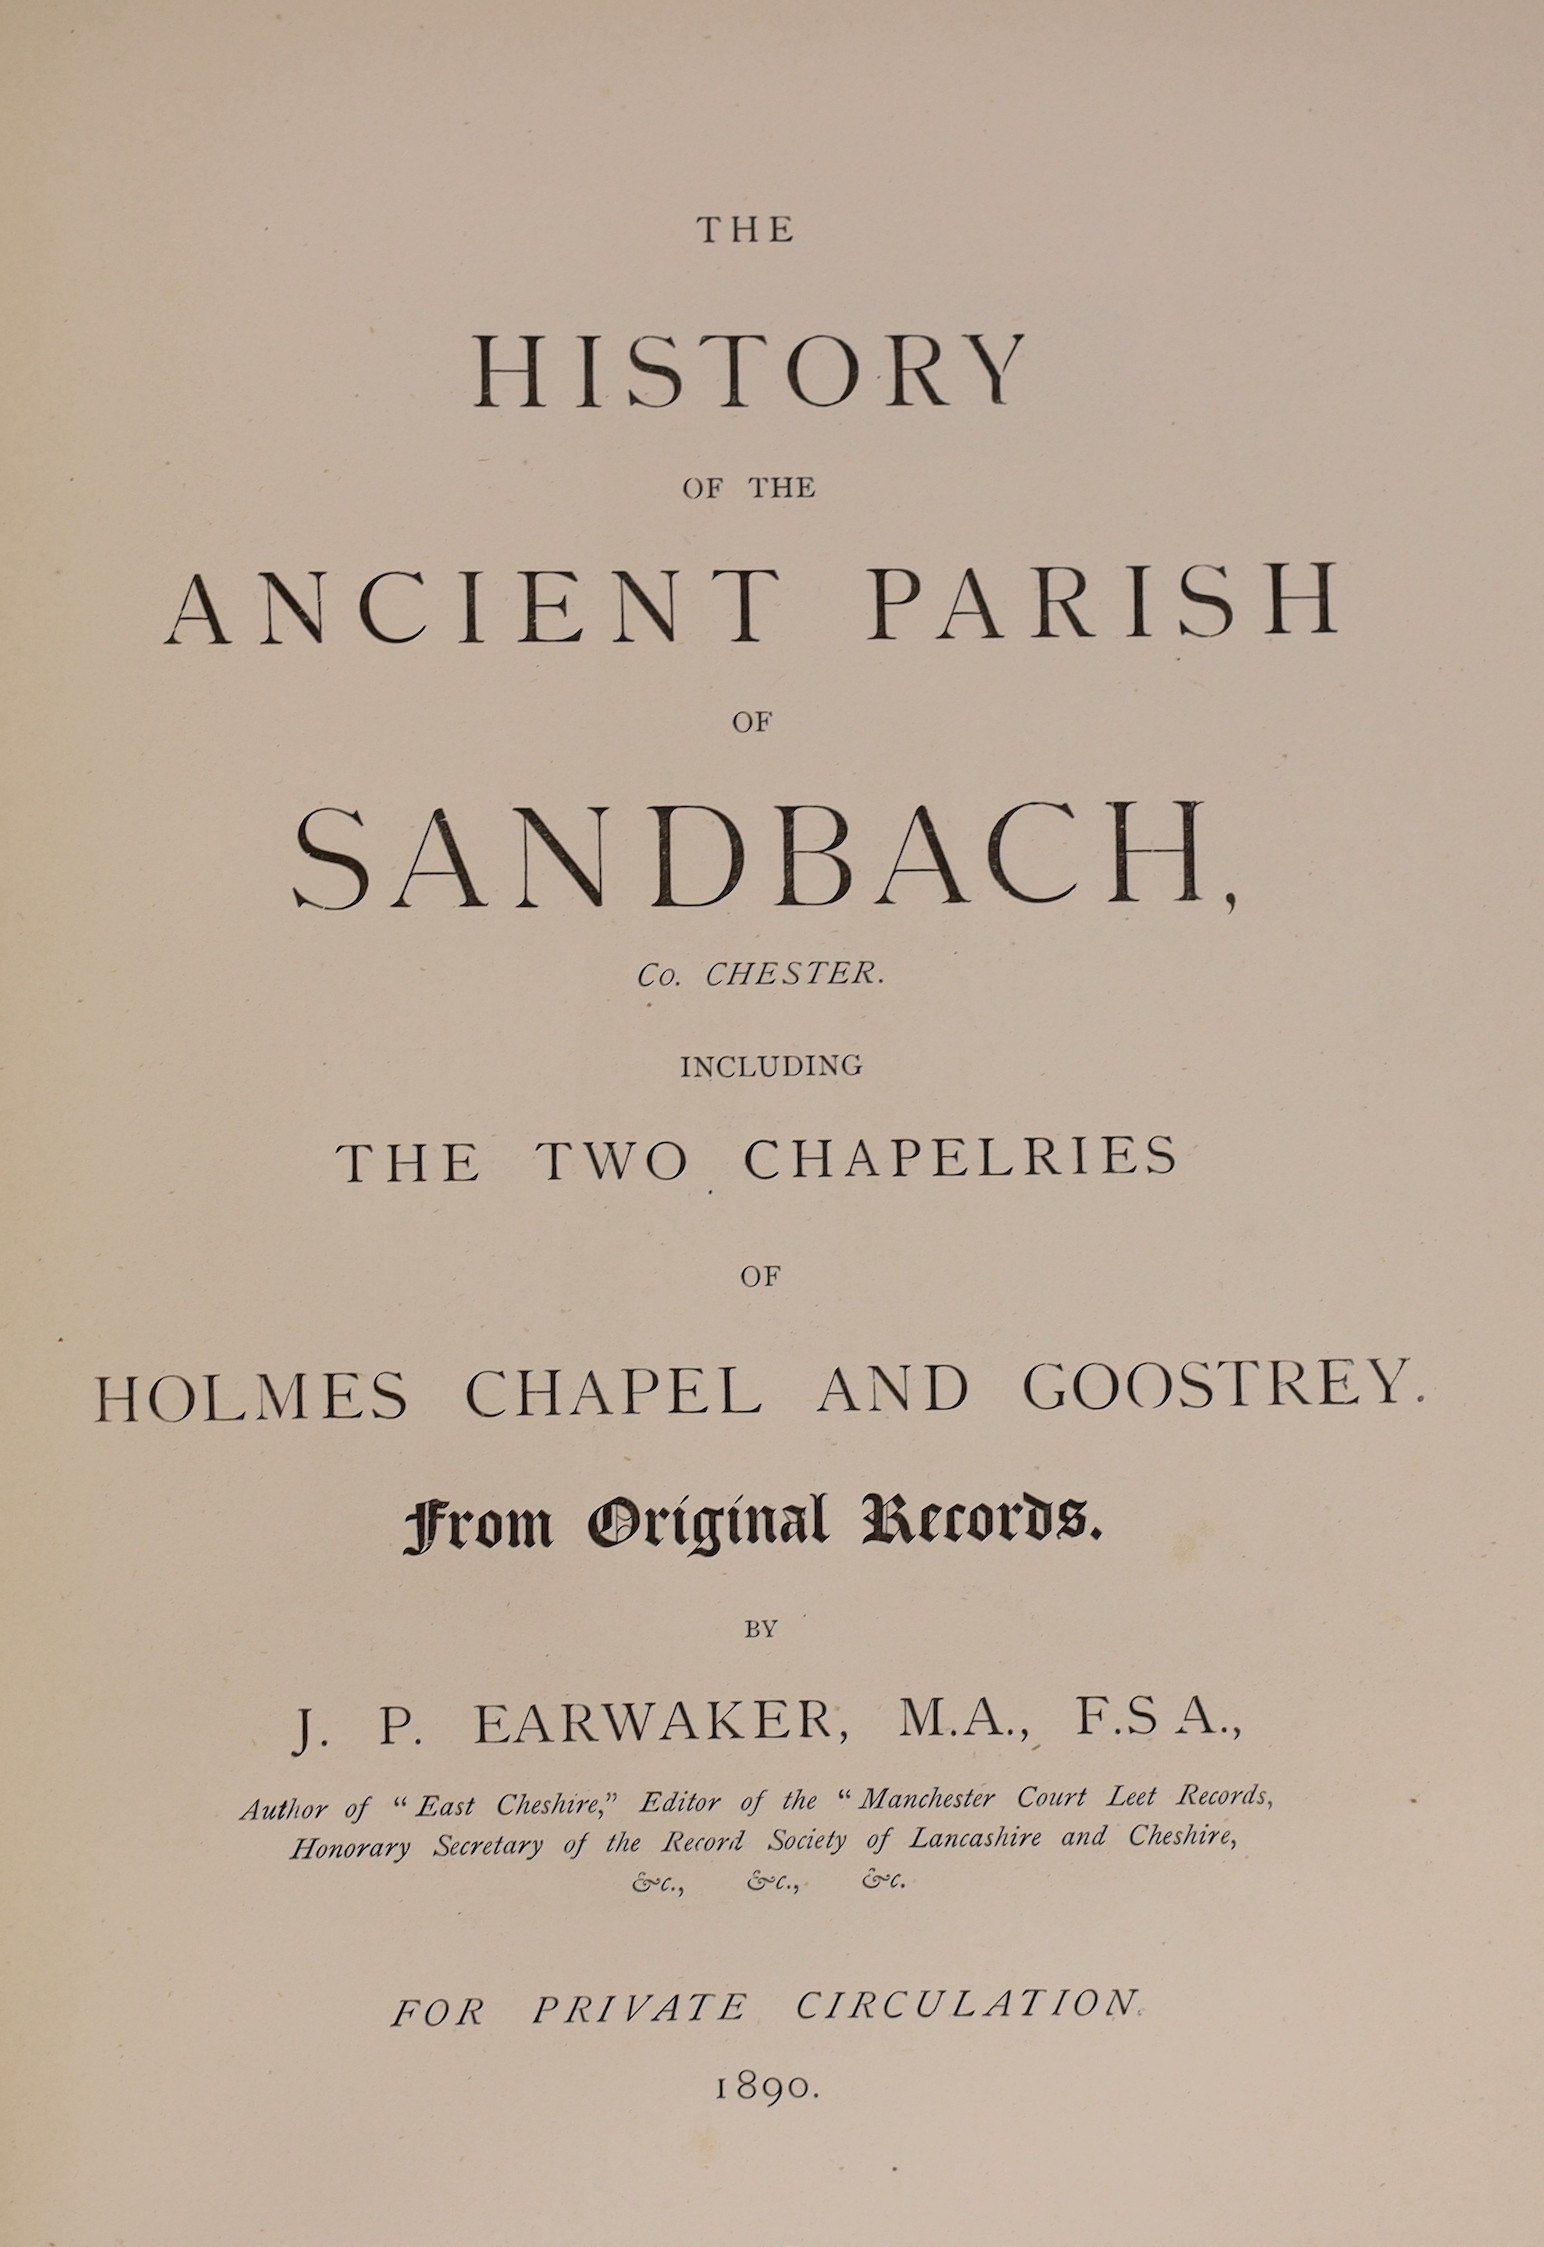 Earwaker, J.P - The History of the Ancient Parish of Sandbach, one of 250, large 4to, cloth gilt, privately printed, 1890